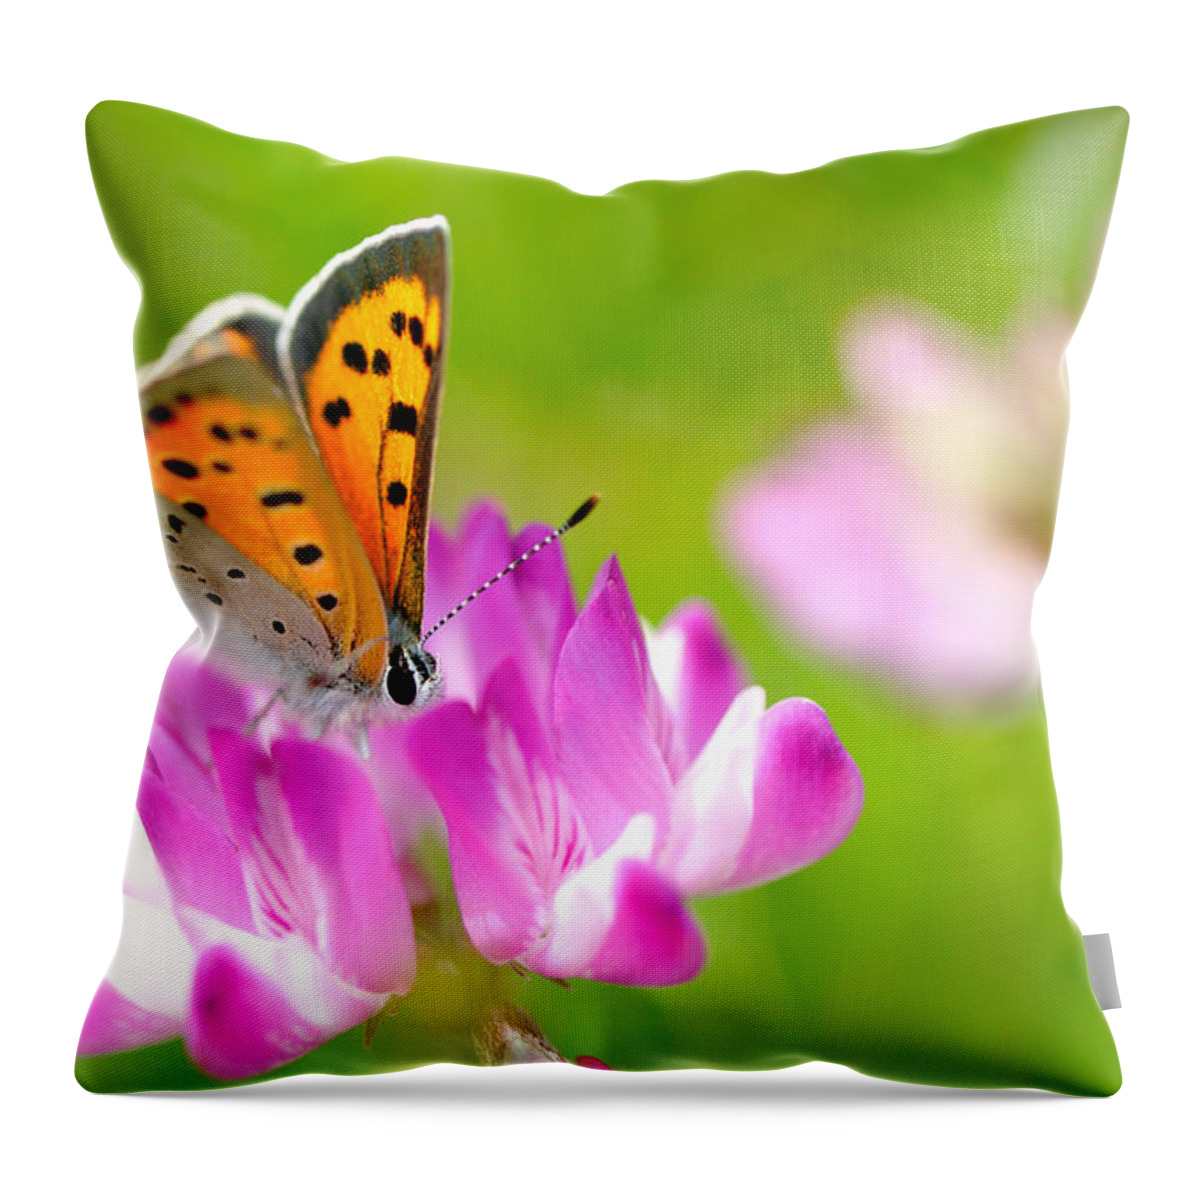 Insect Throw Pillow featuring the photograph Chinese Milk Vetch With Butterfly by Myu-myu